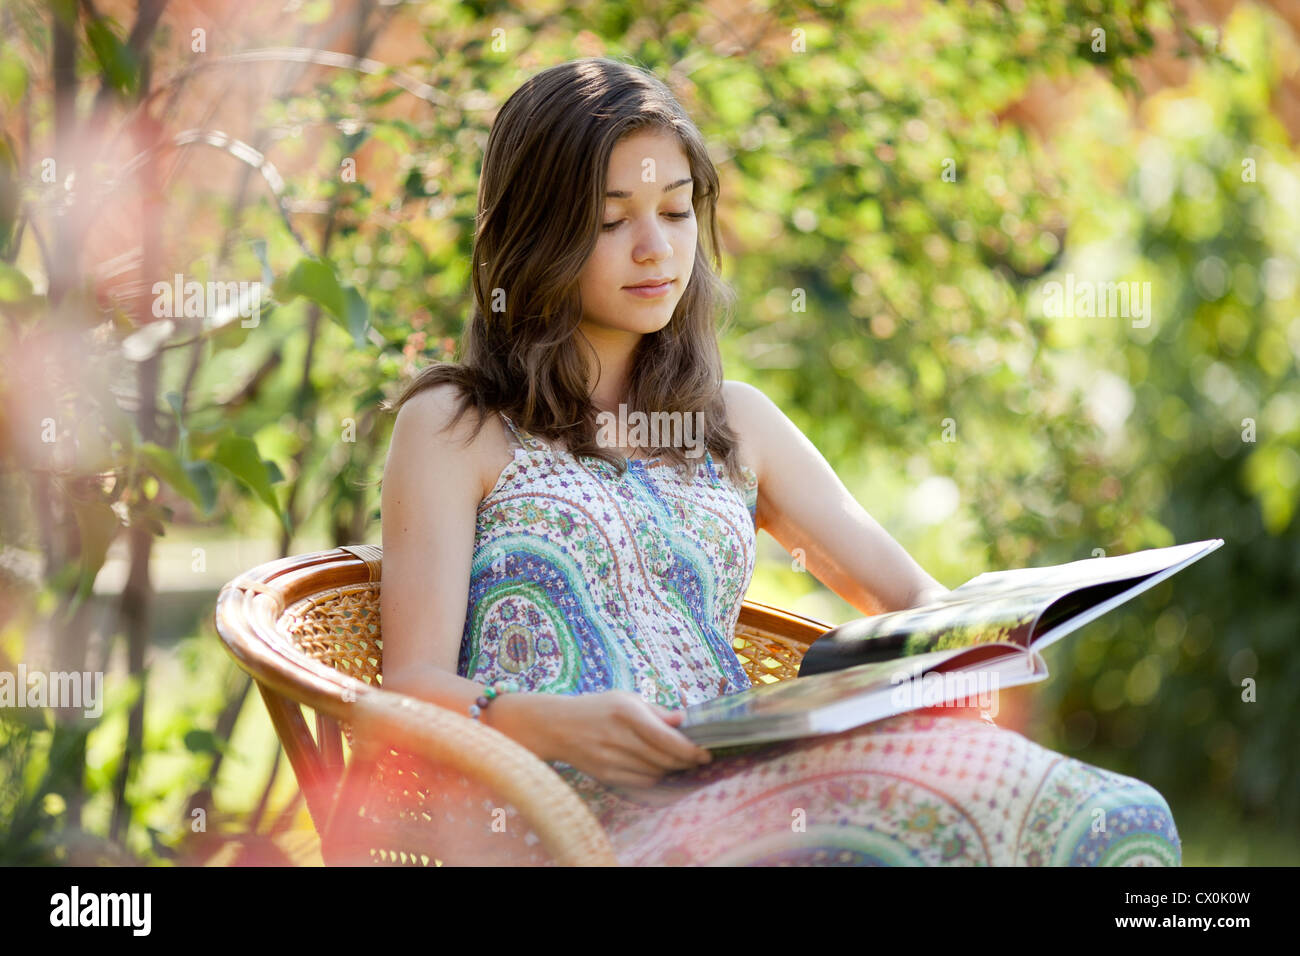 Girl reading book sitting in wicker chair outdoor in summer day Stock Photo